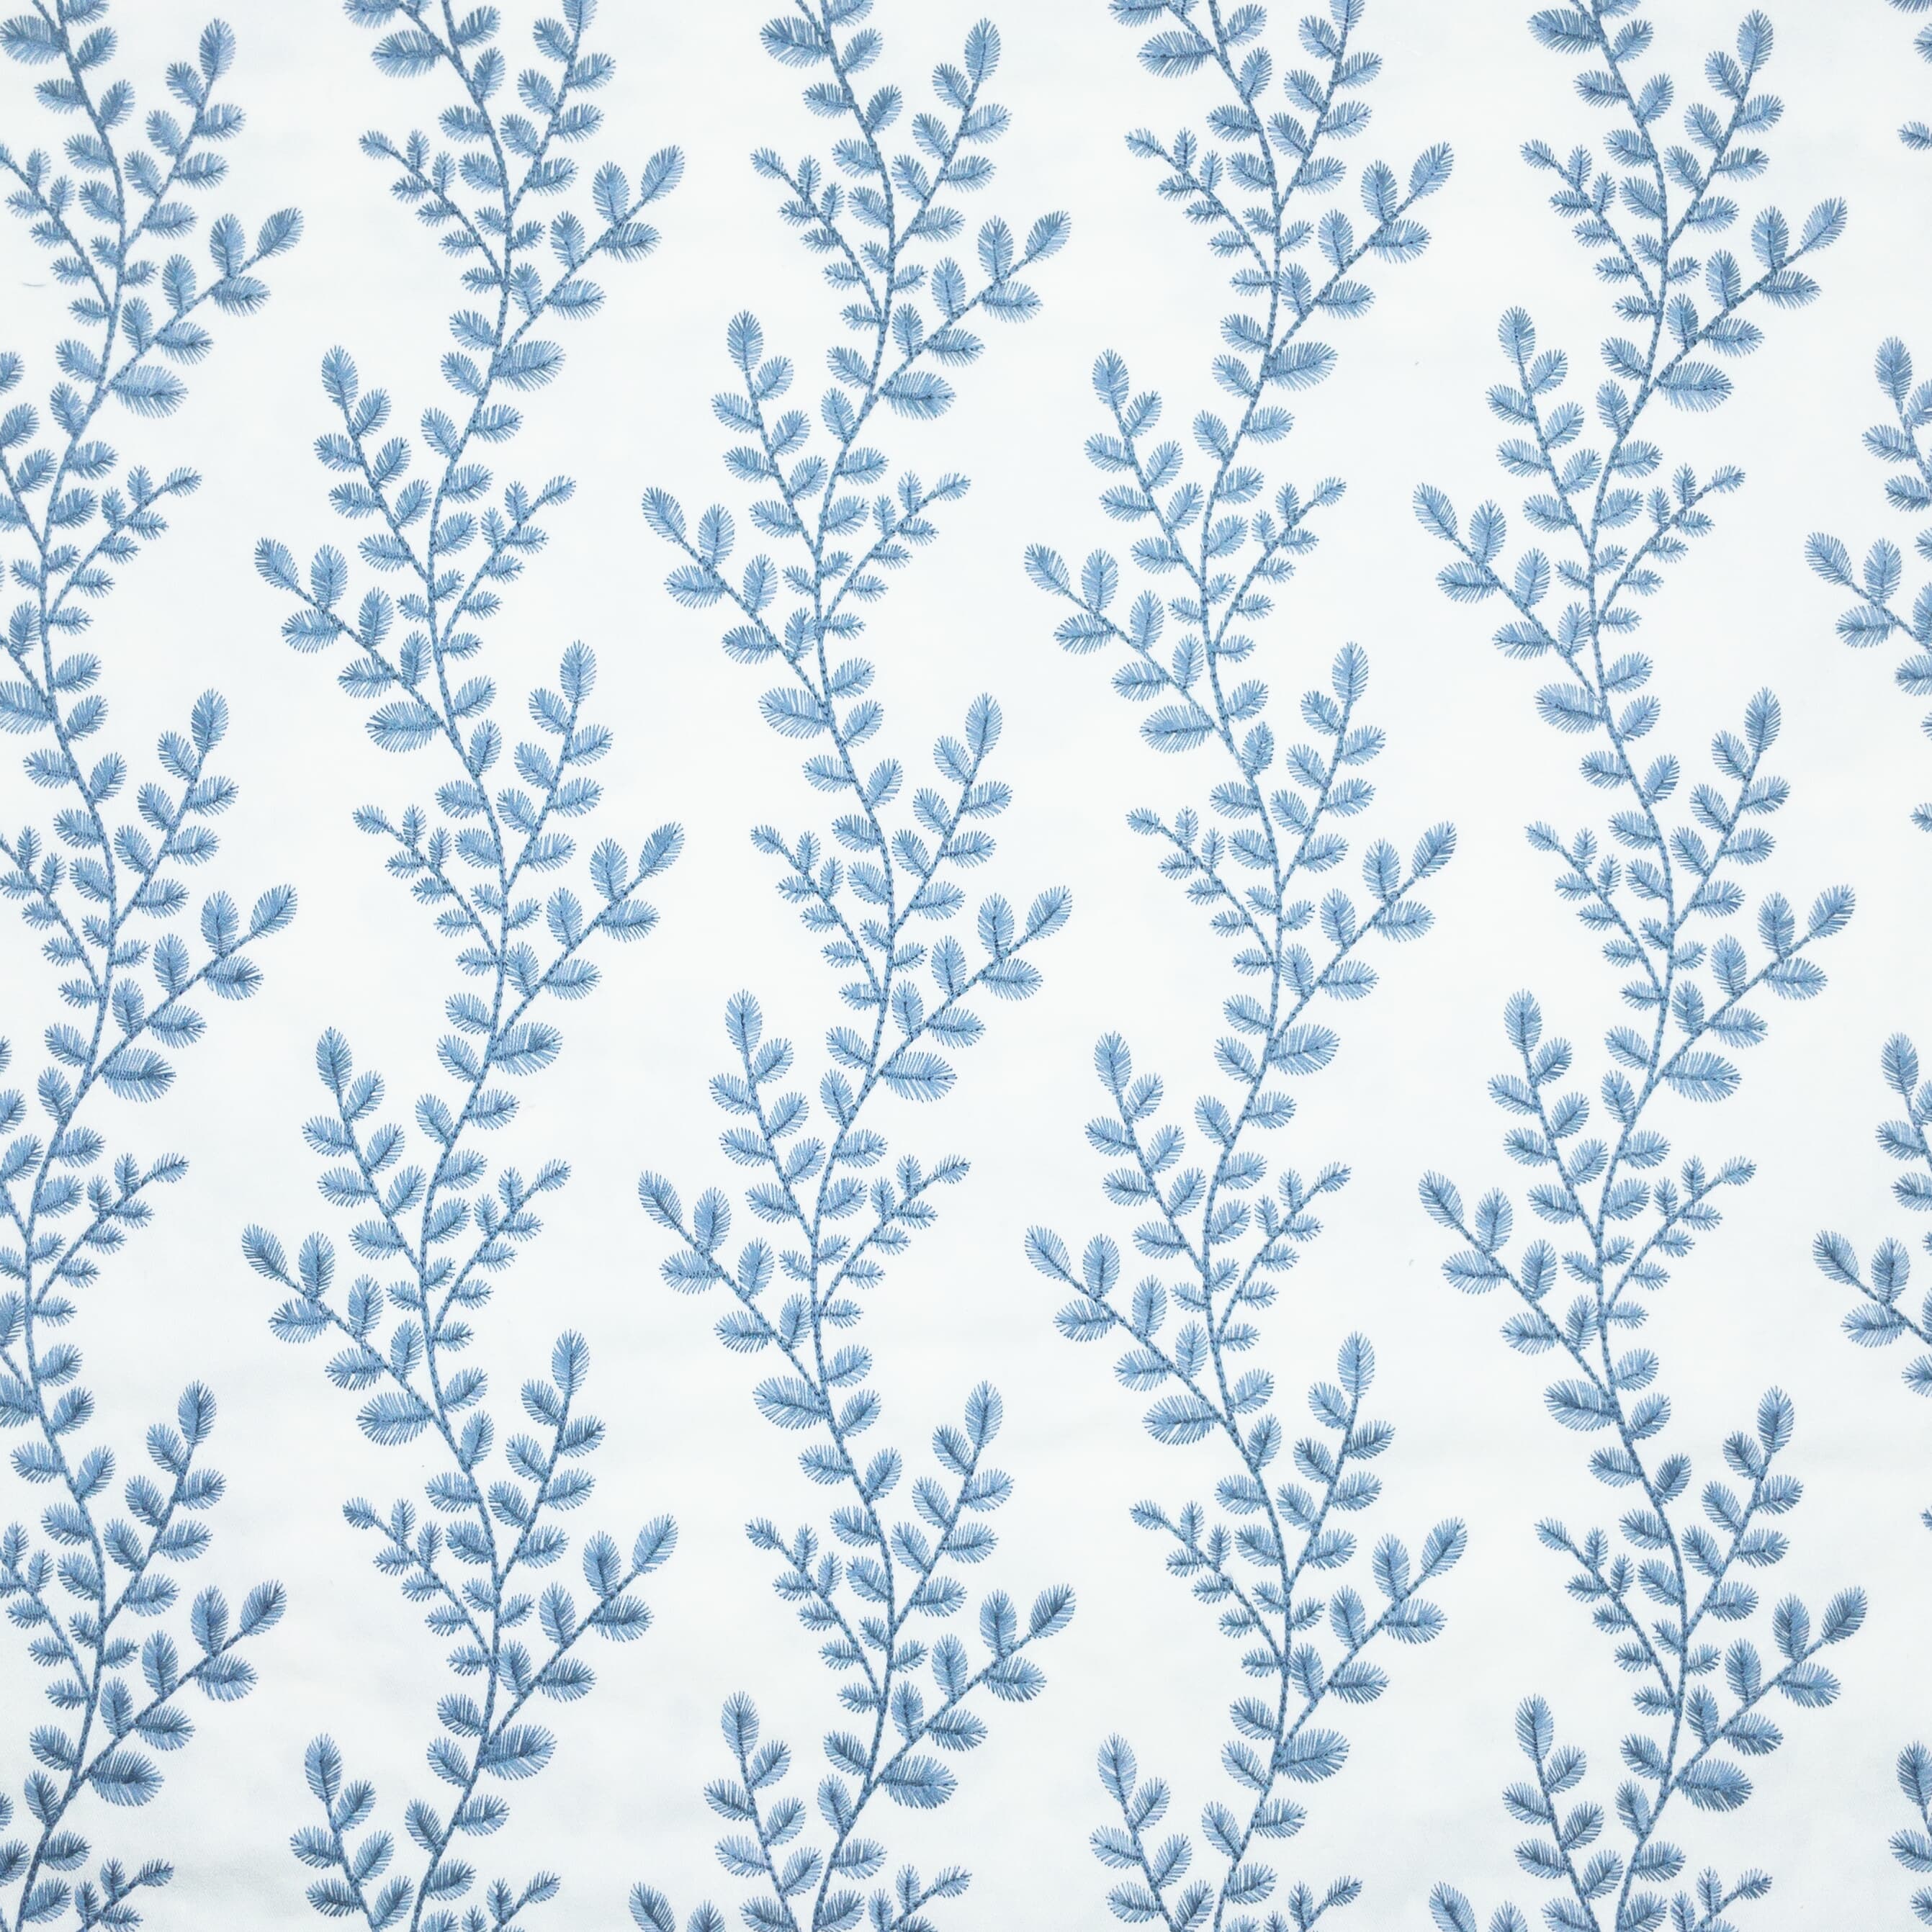 Bigbend 3 Periwinkle by Stout Fabric